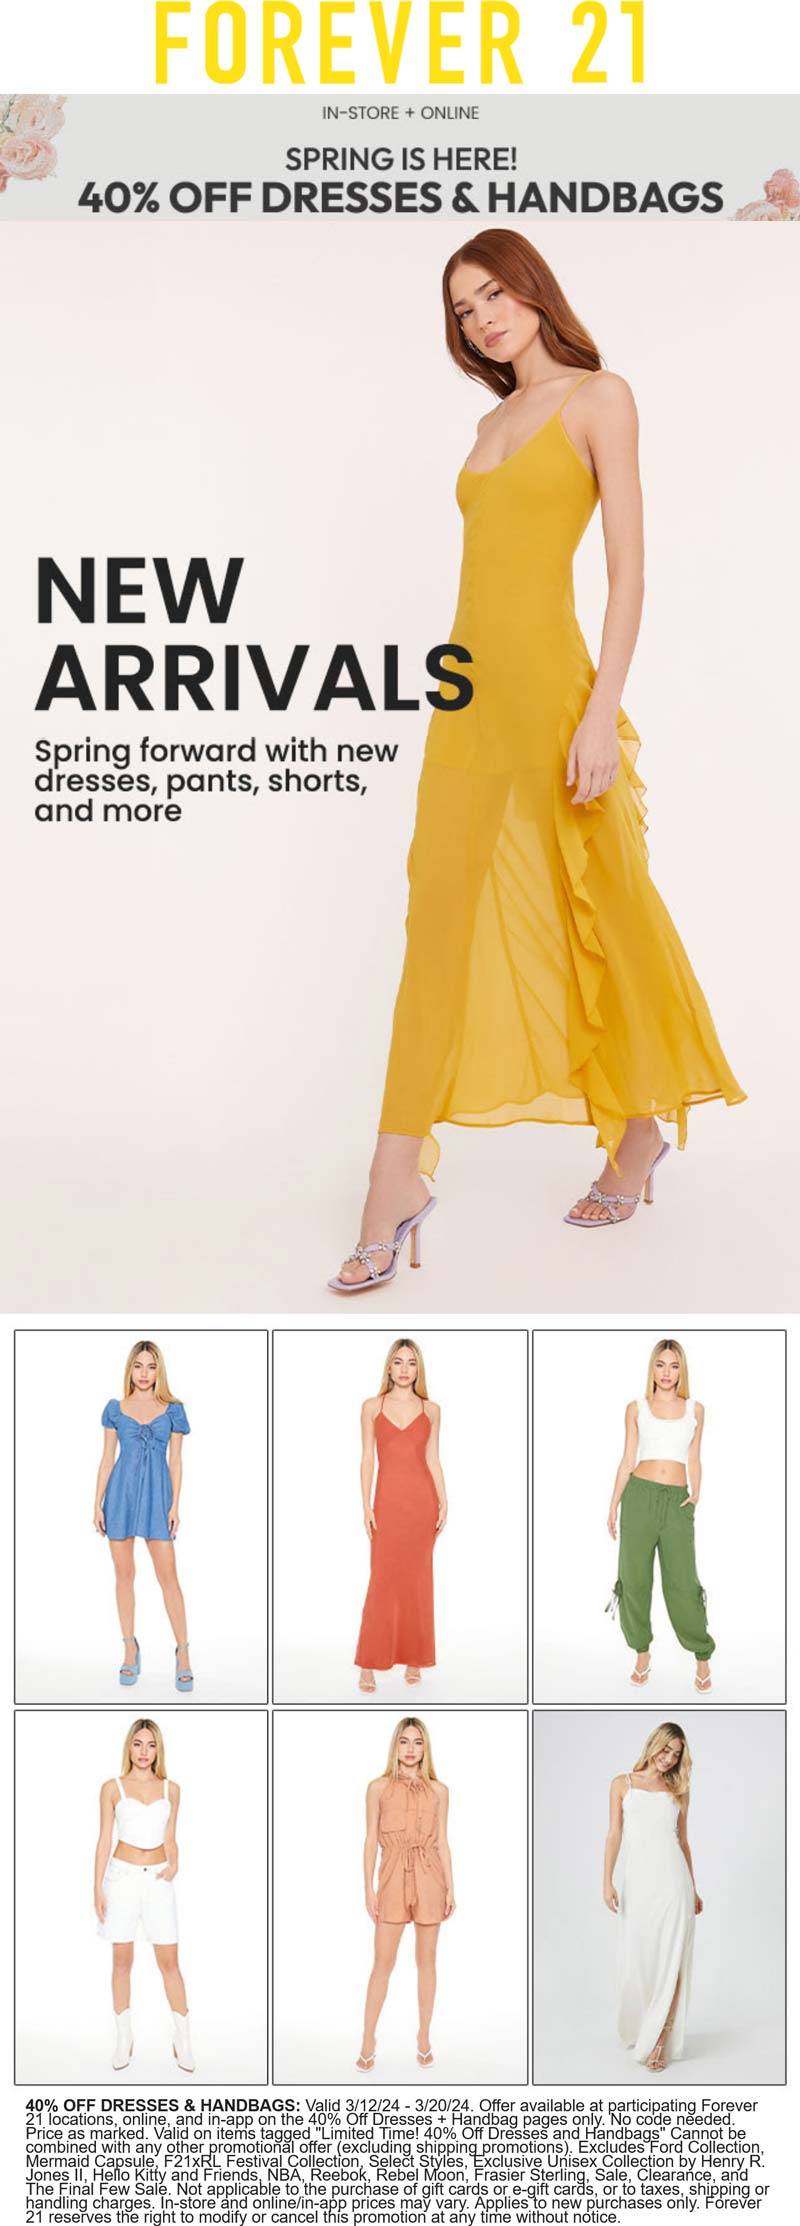 Forever 21 stores Coupon  40% off dresses & handbags at Forever 21, ditto online #forever21 